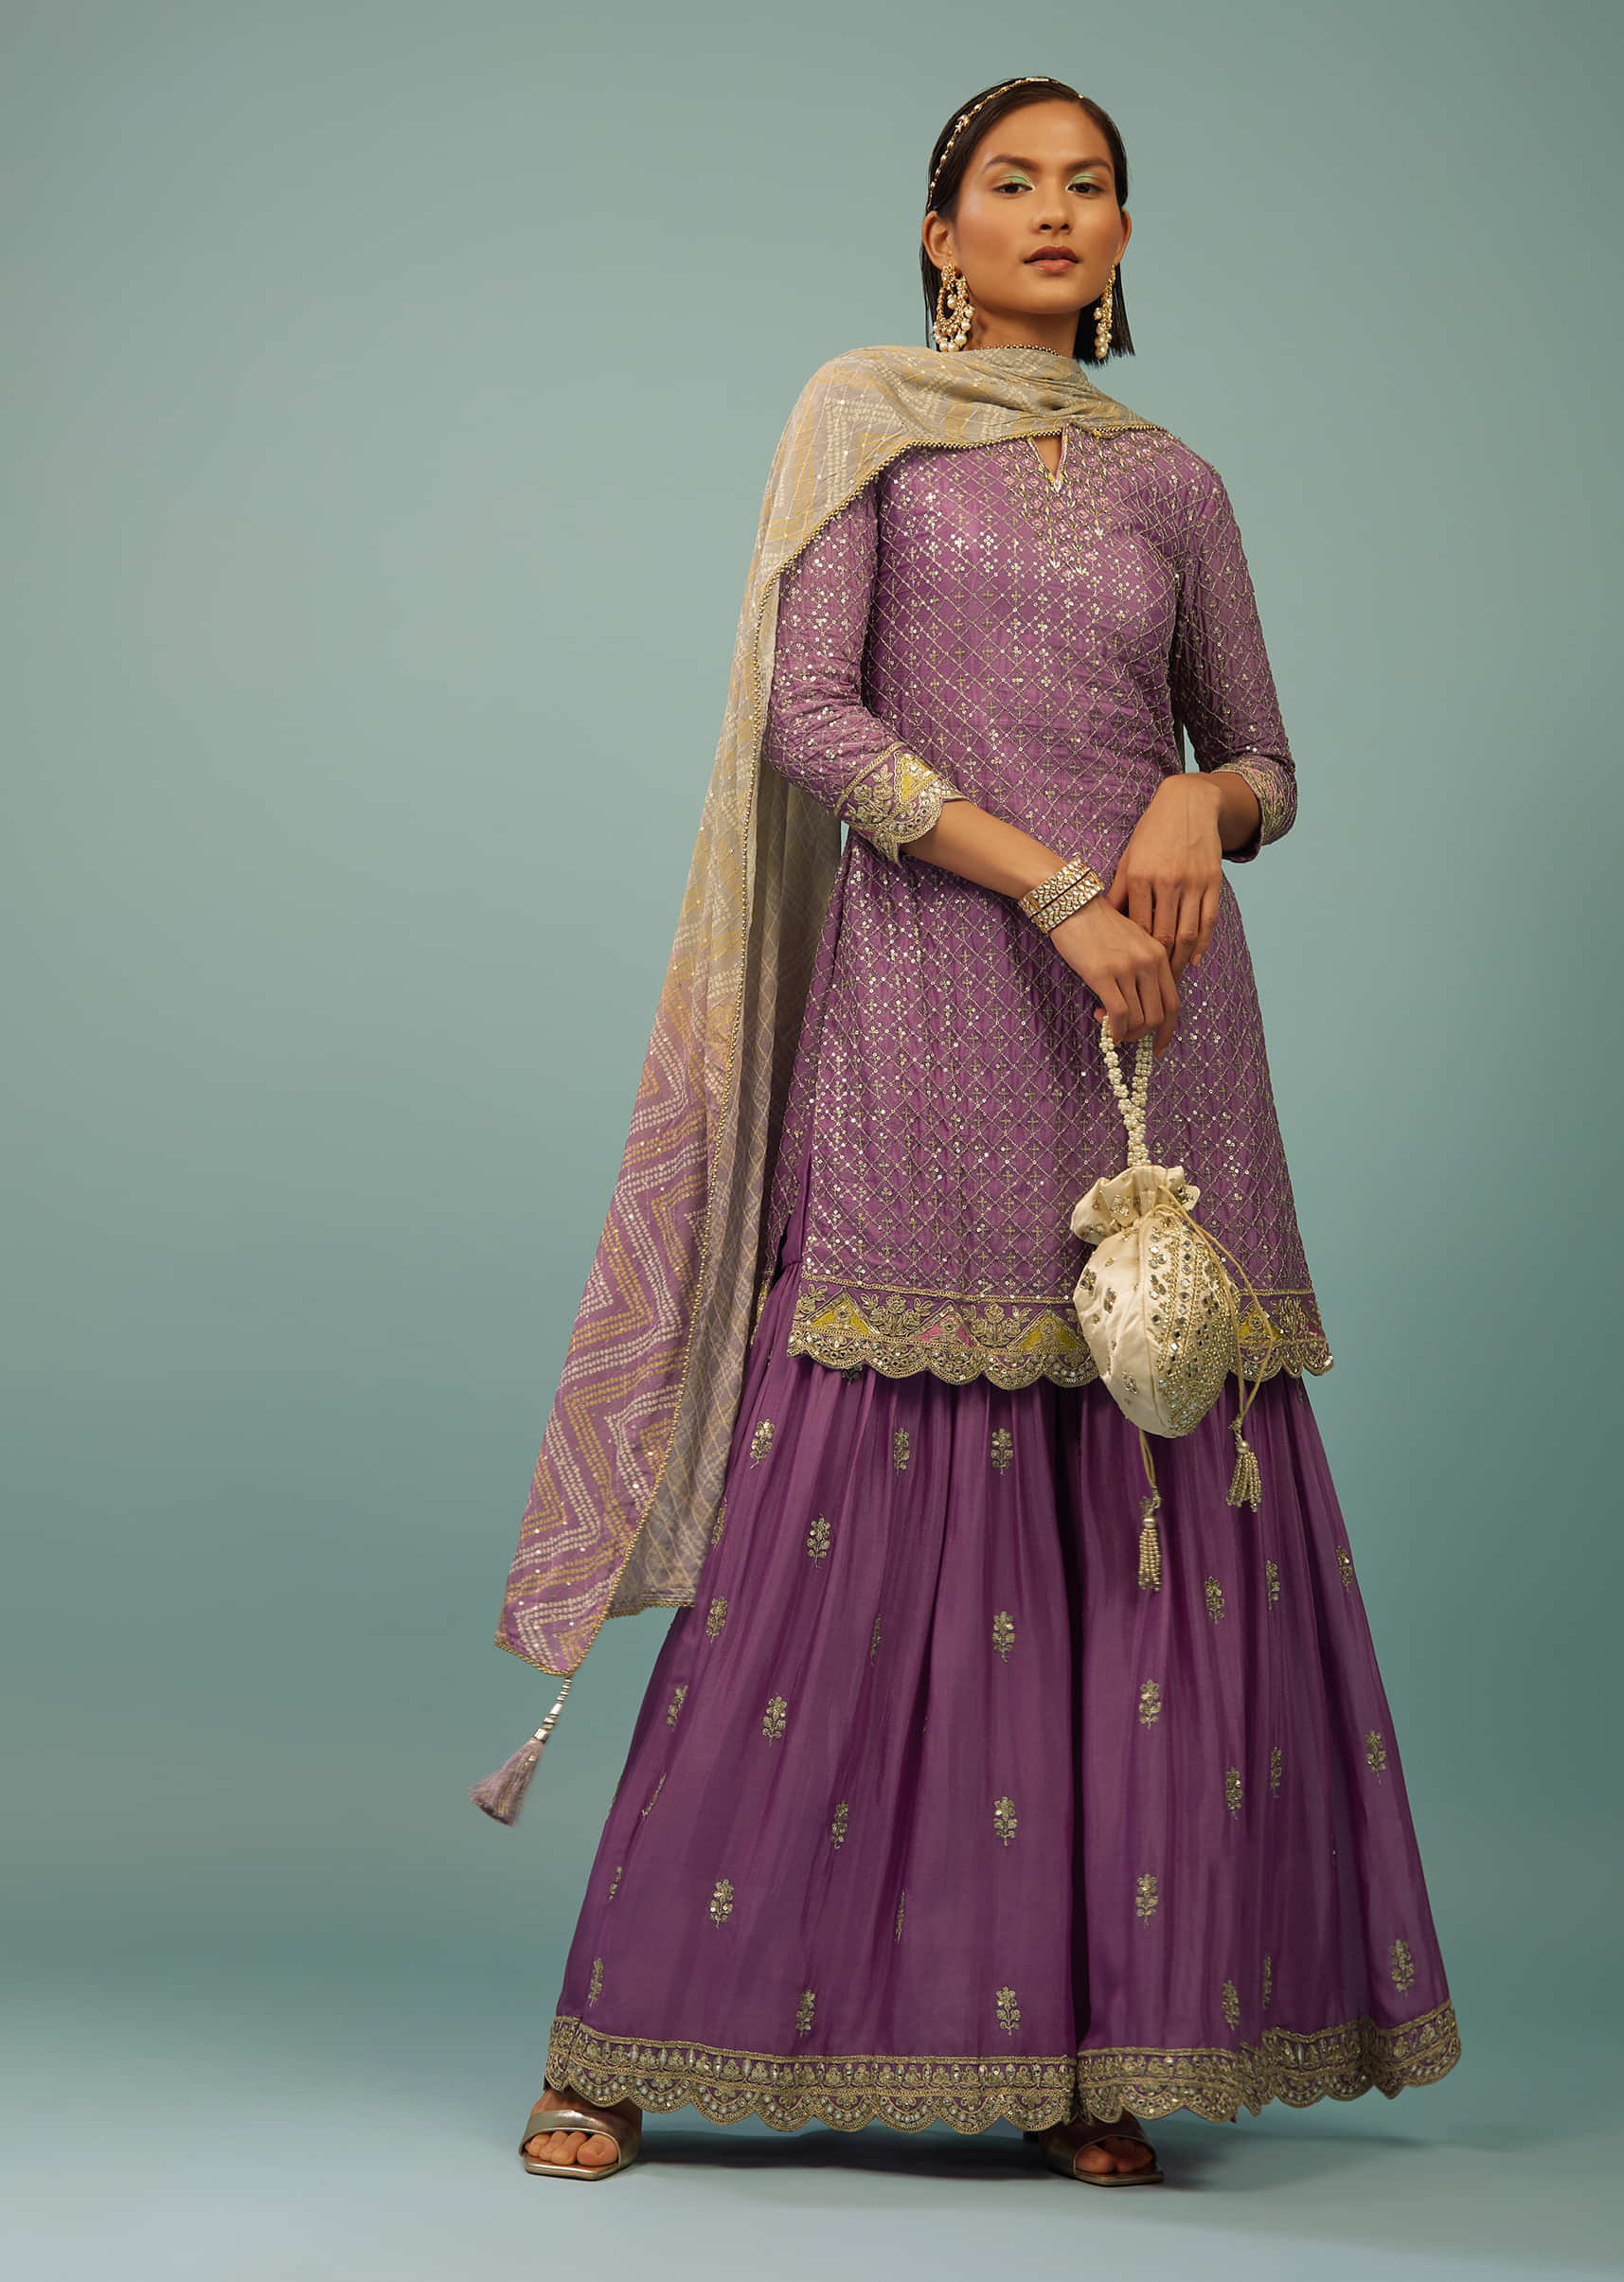 Lavender Purple Sharara Suit With Embroidery And Bandhani Dupatta